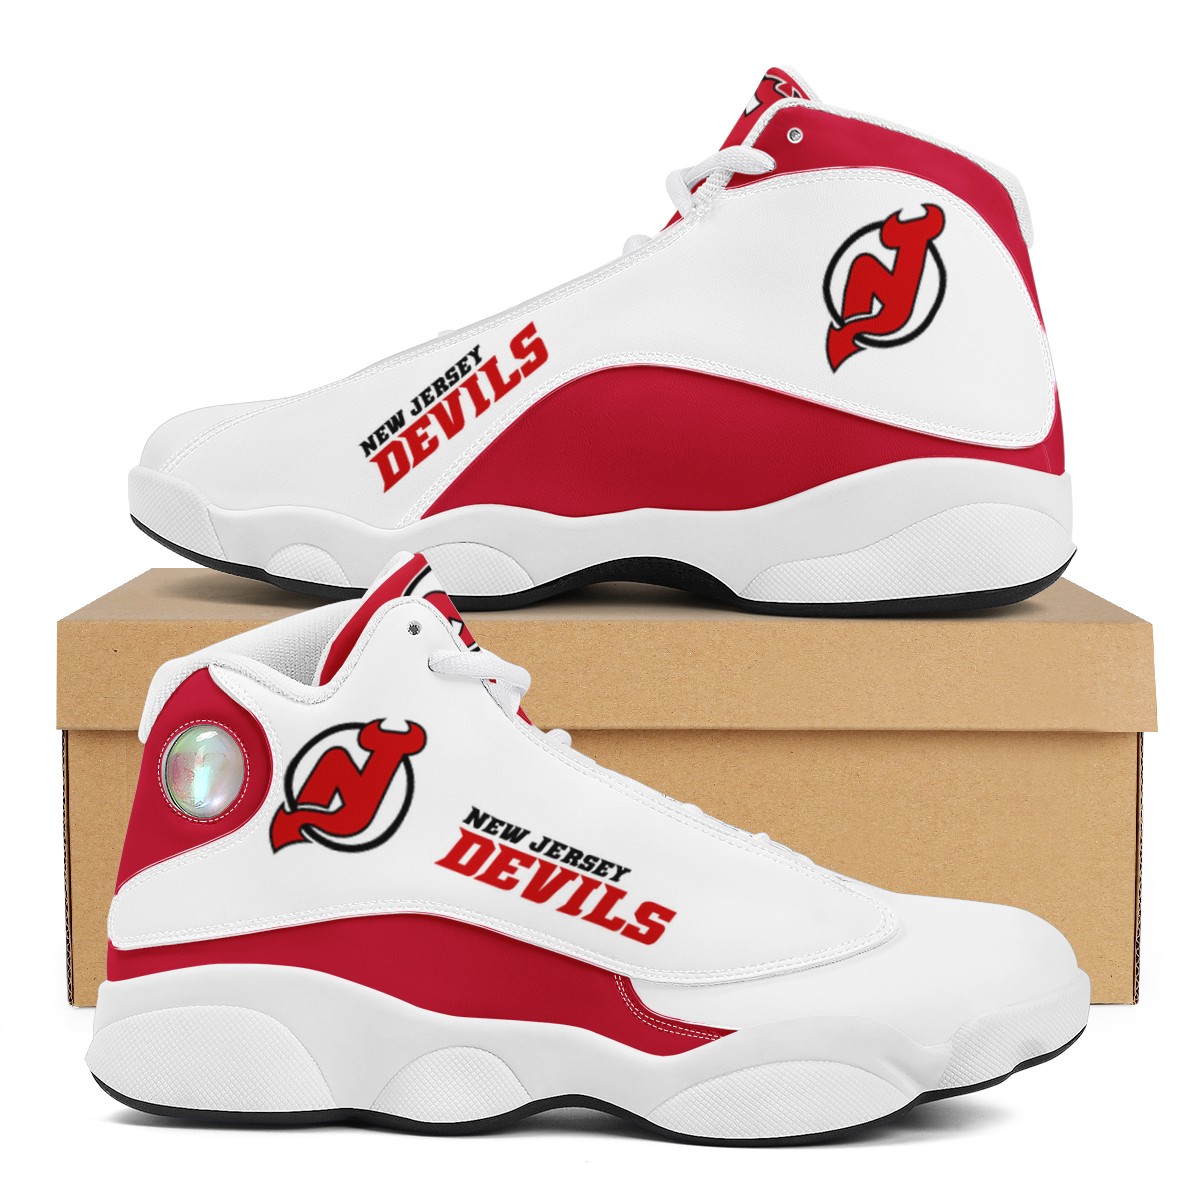 Women's New Jersey Devils Limited Edition JD13 Sneakers 001